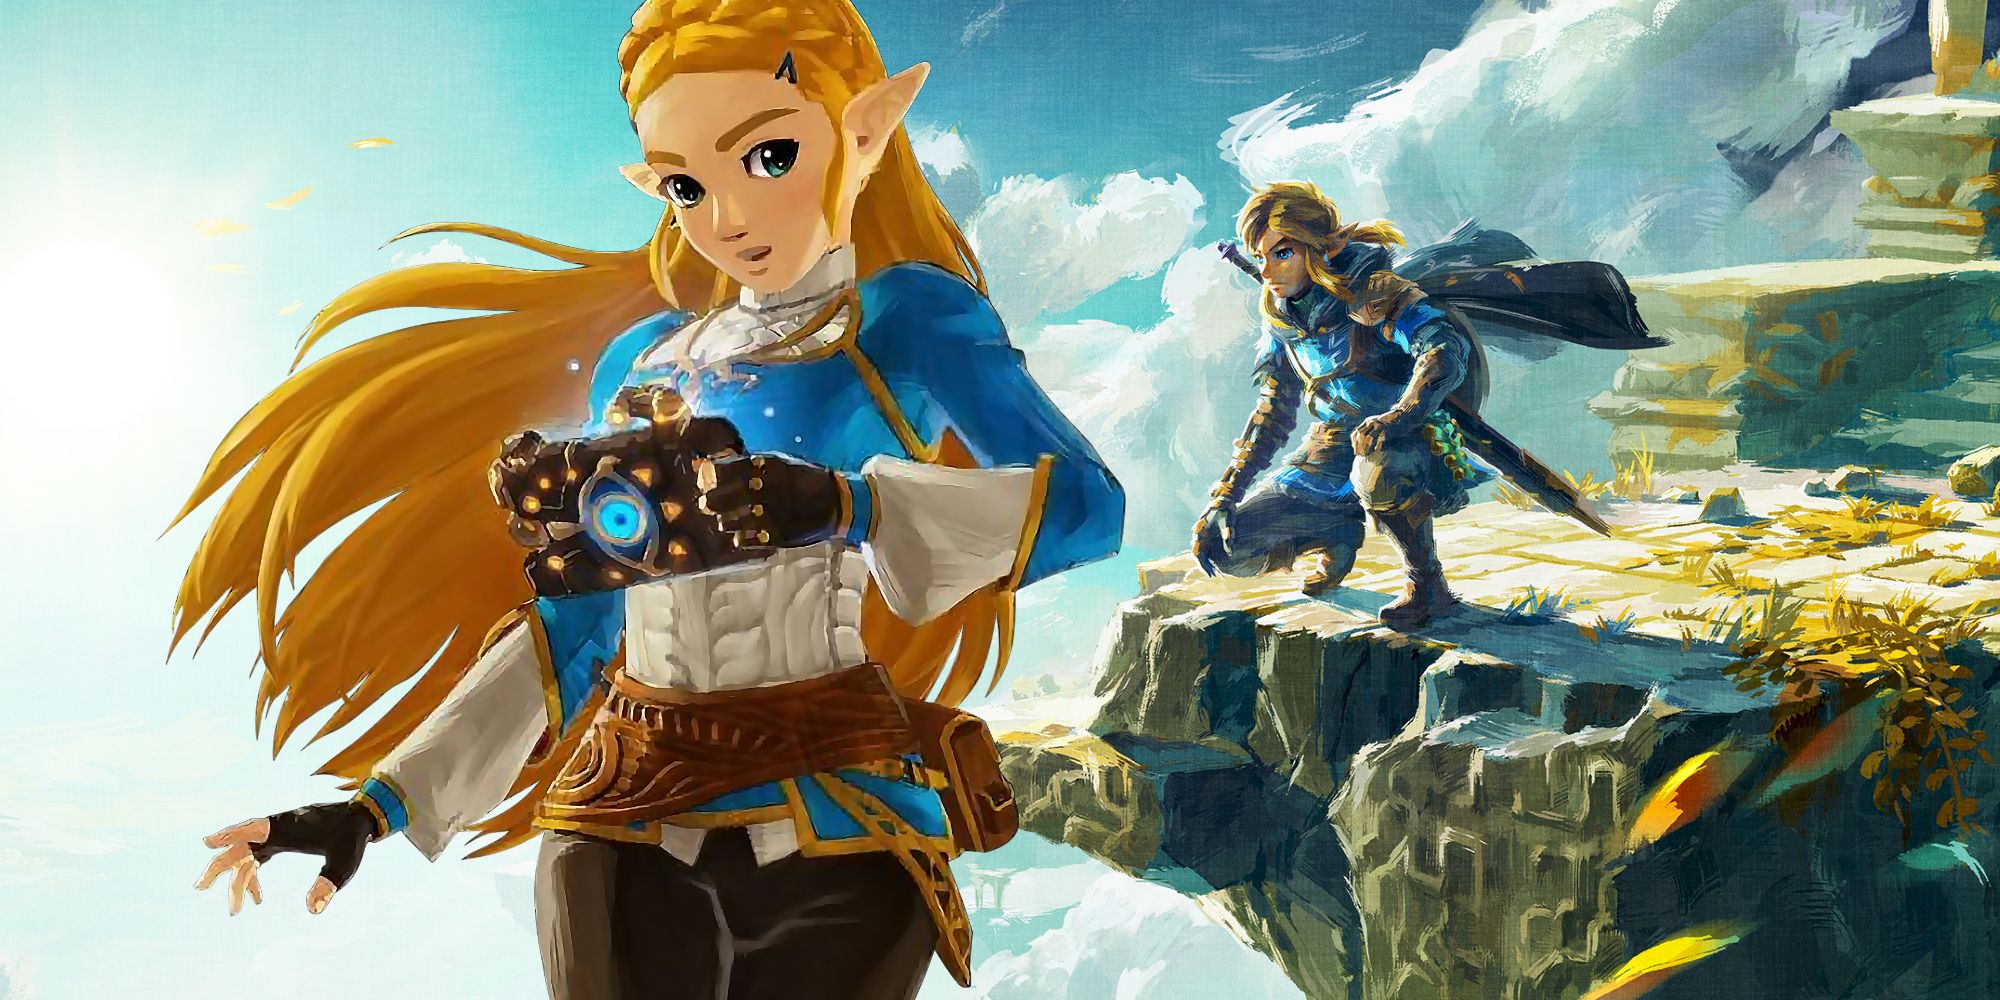 Official character art of Princess Zelda from Hyrule Warriors: Age of Calamity holding the Shiekah Slate superimposed on key art for Tears of the Kingdom showing Link crouched on the edge of a floating island.